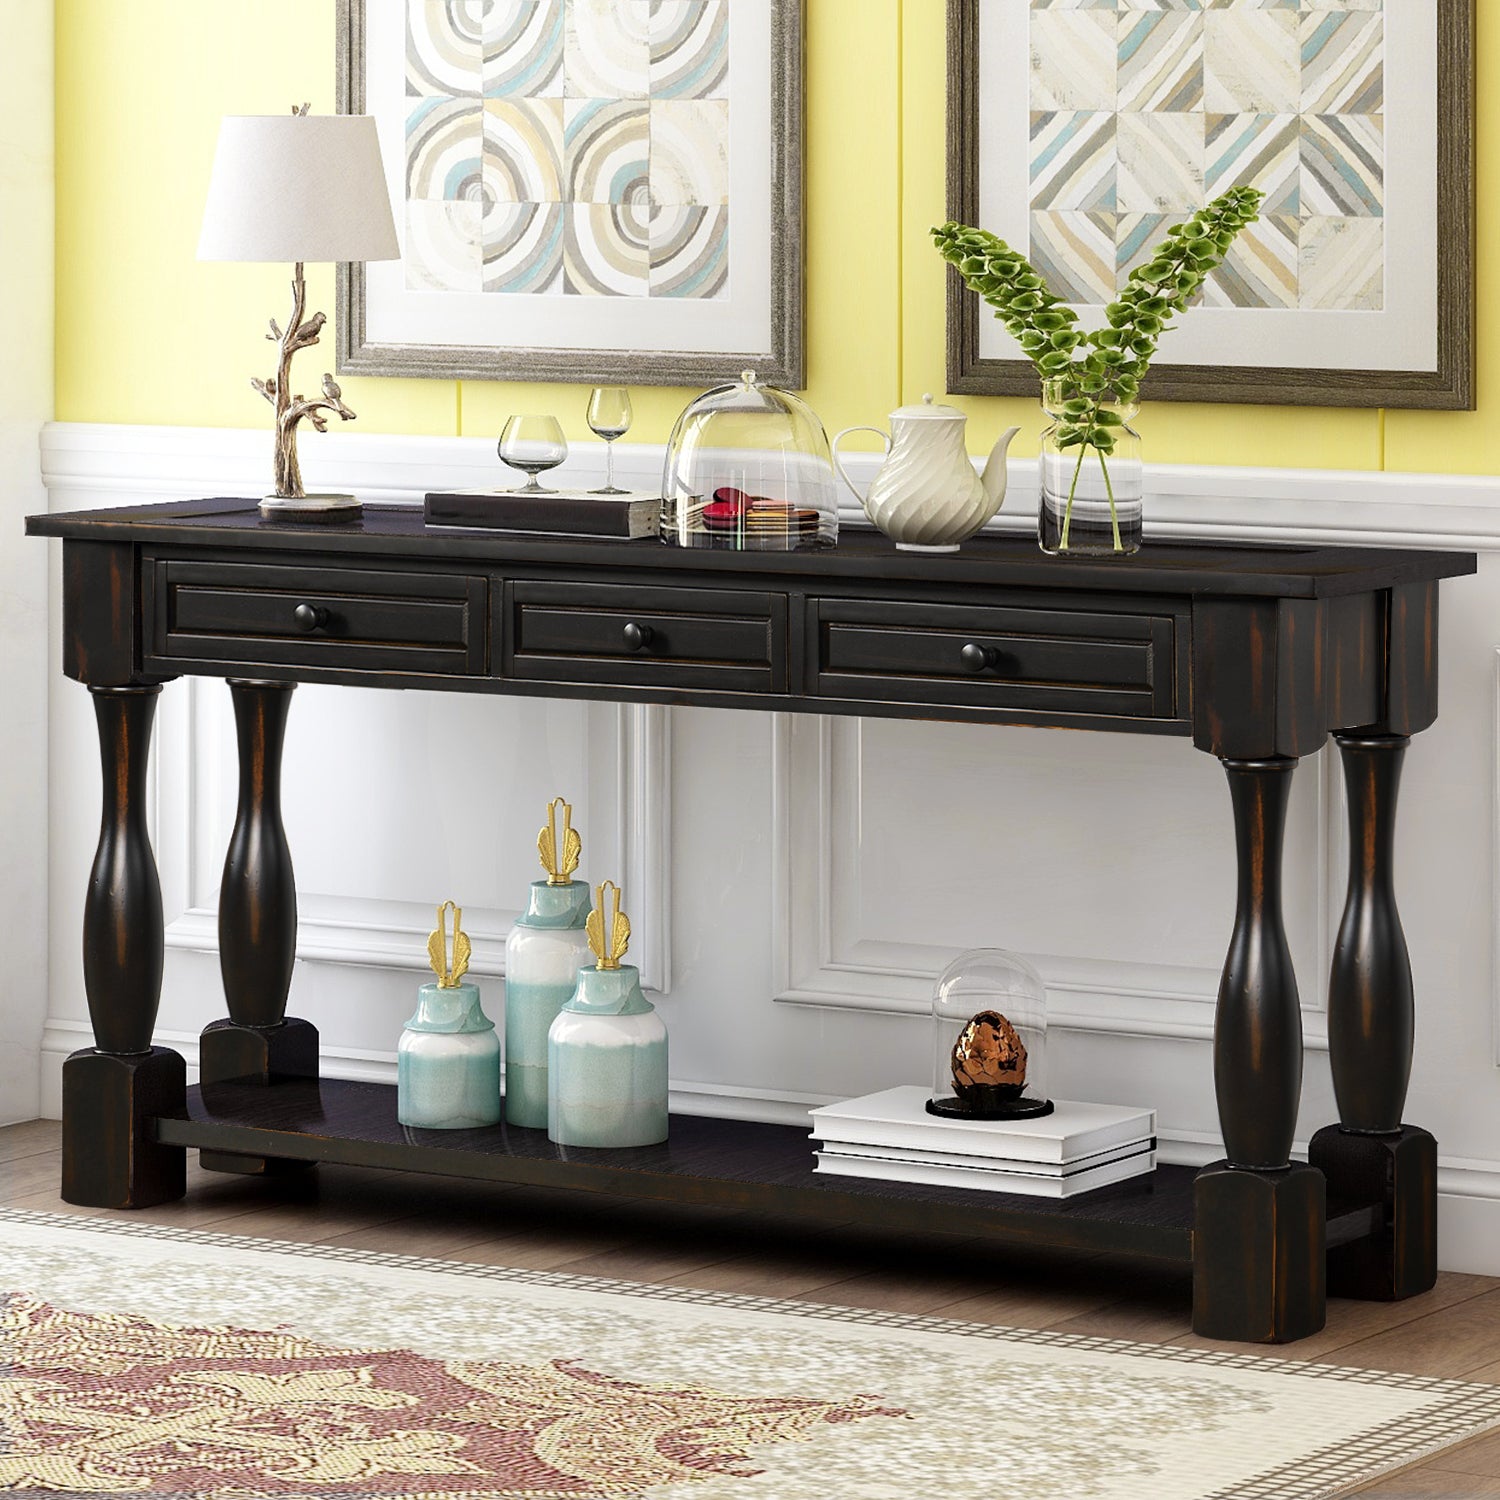 64" console table sideboard, entryway table distressed black color